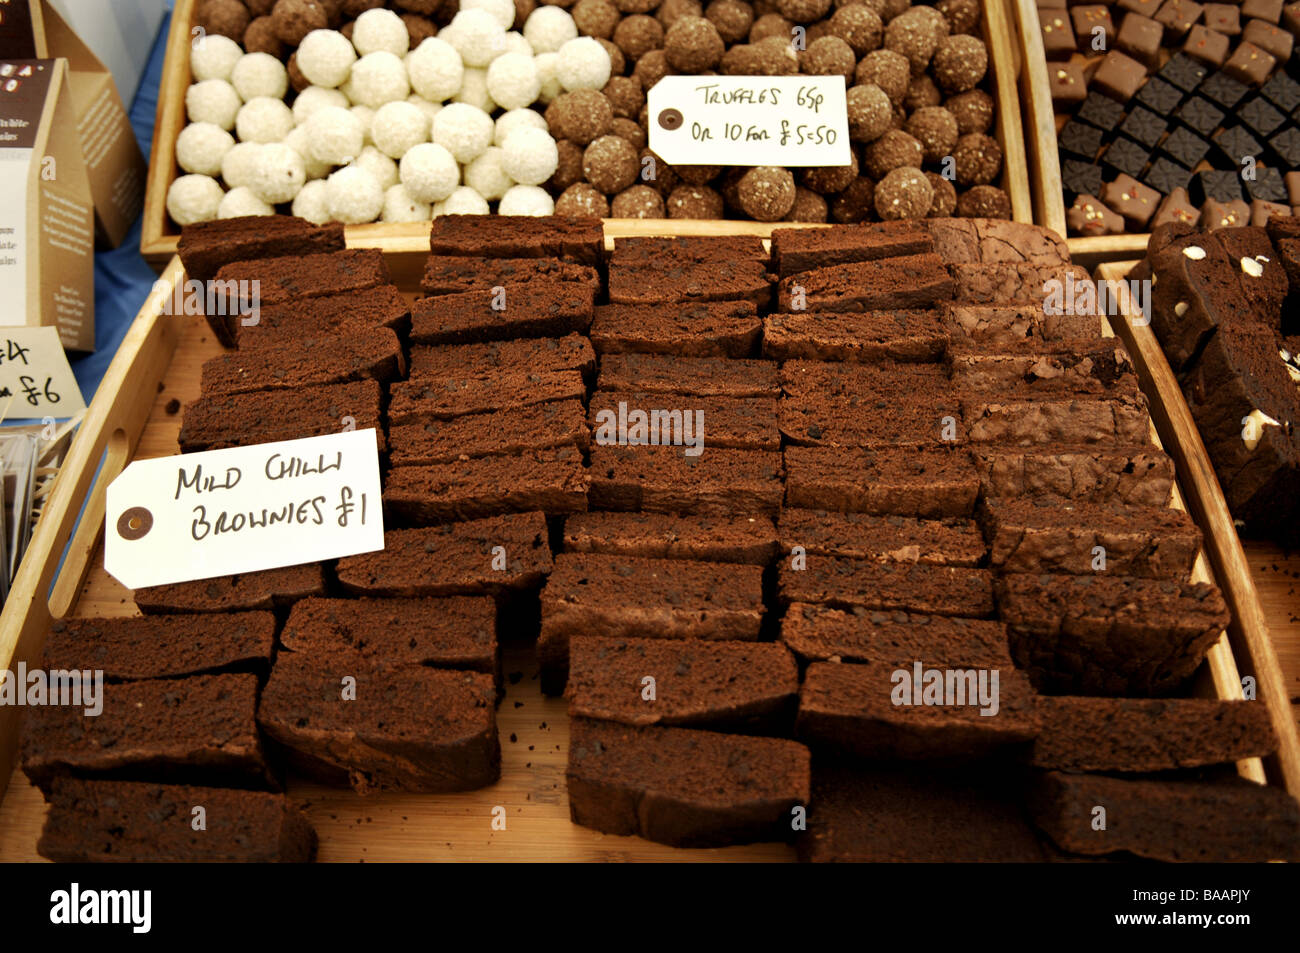 Chilli flavoured chocolate brownies on display at the Fiery Food Festival in Brighton Sussex UK Stock Photo